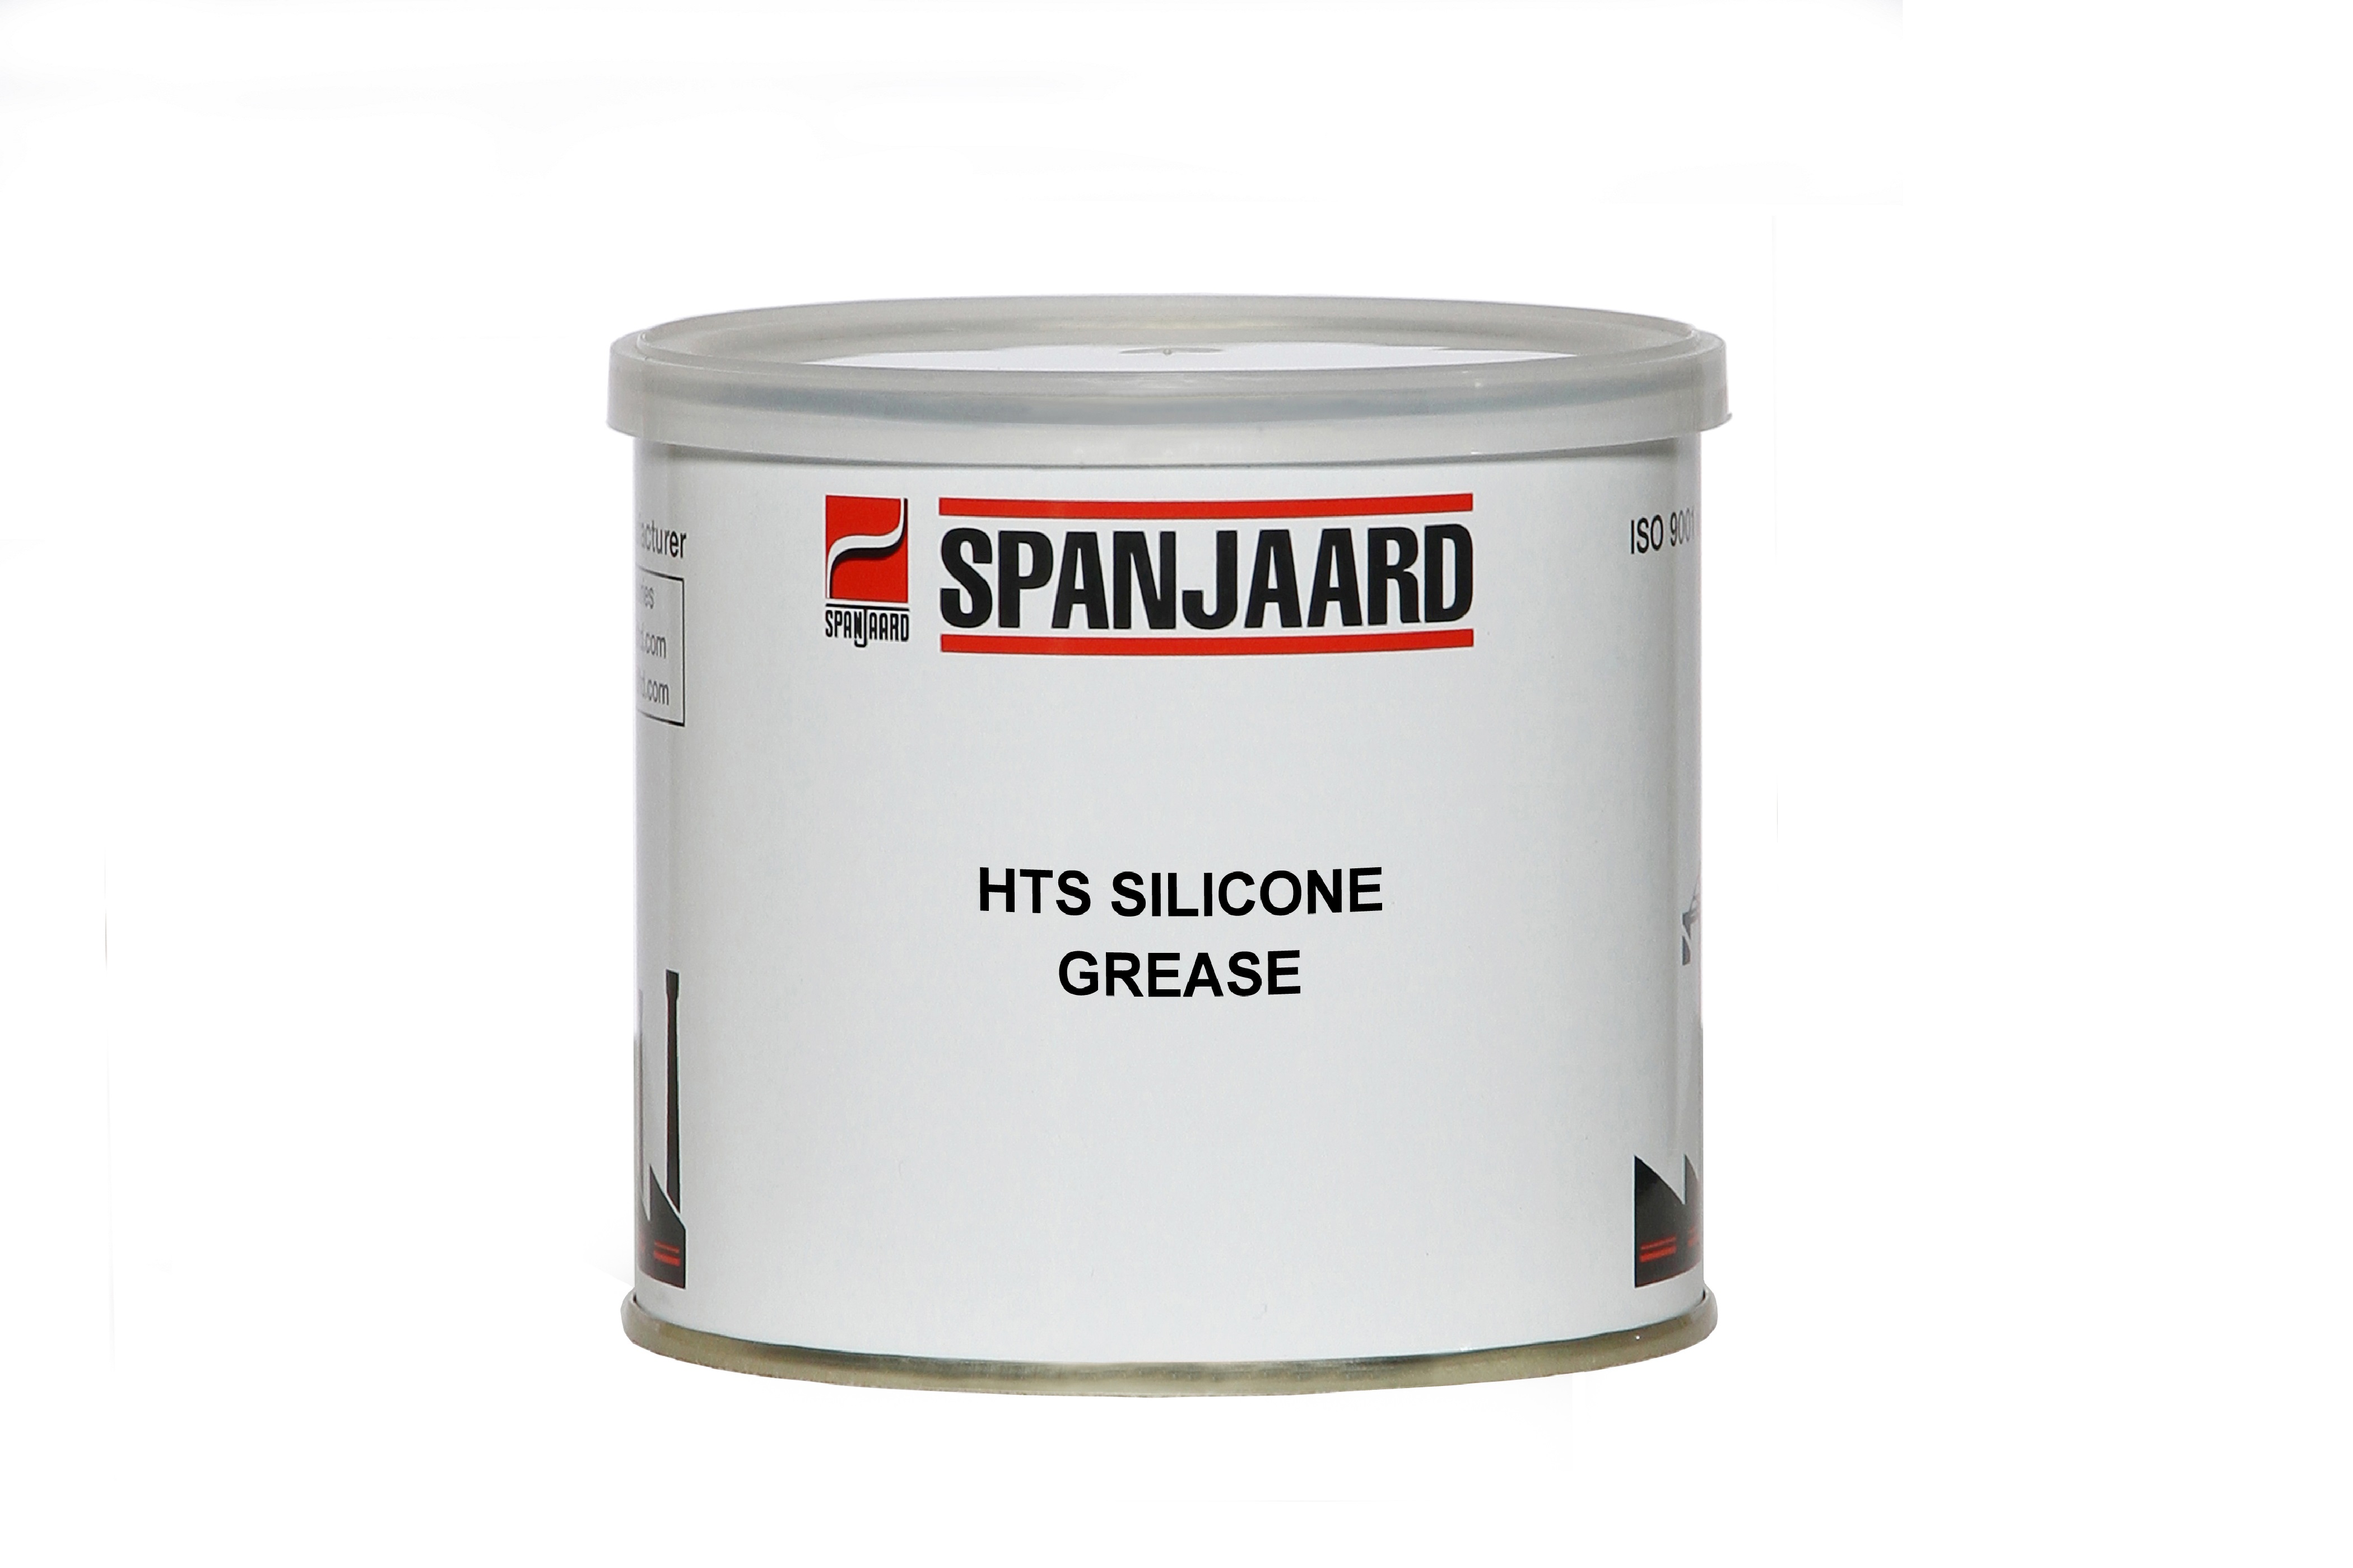 HTS Silicone Grease 500g tin